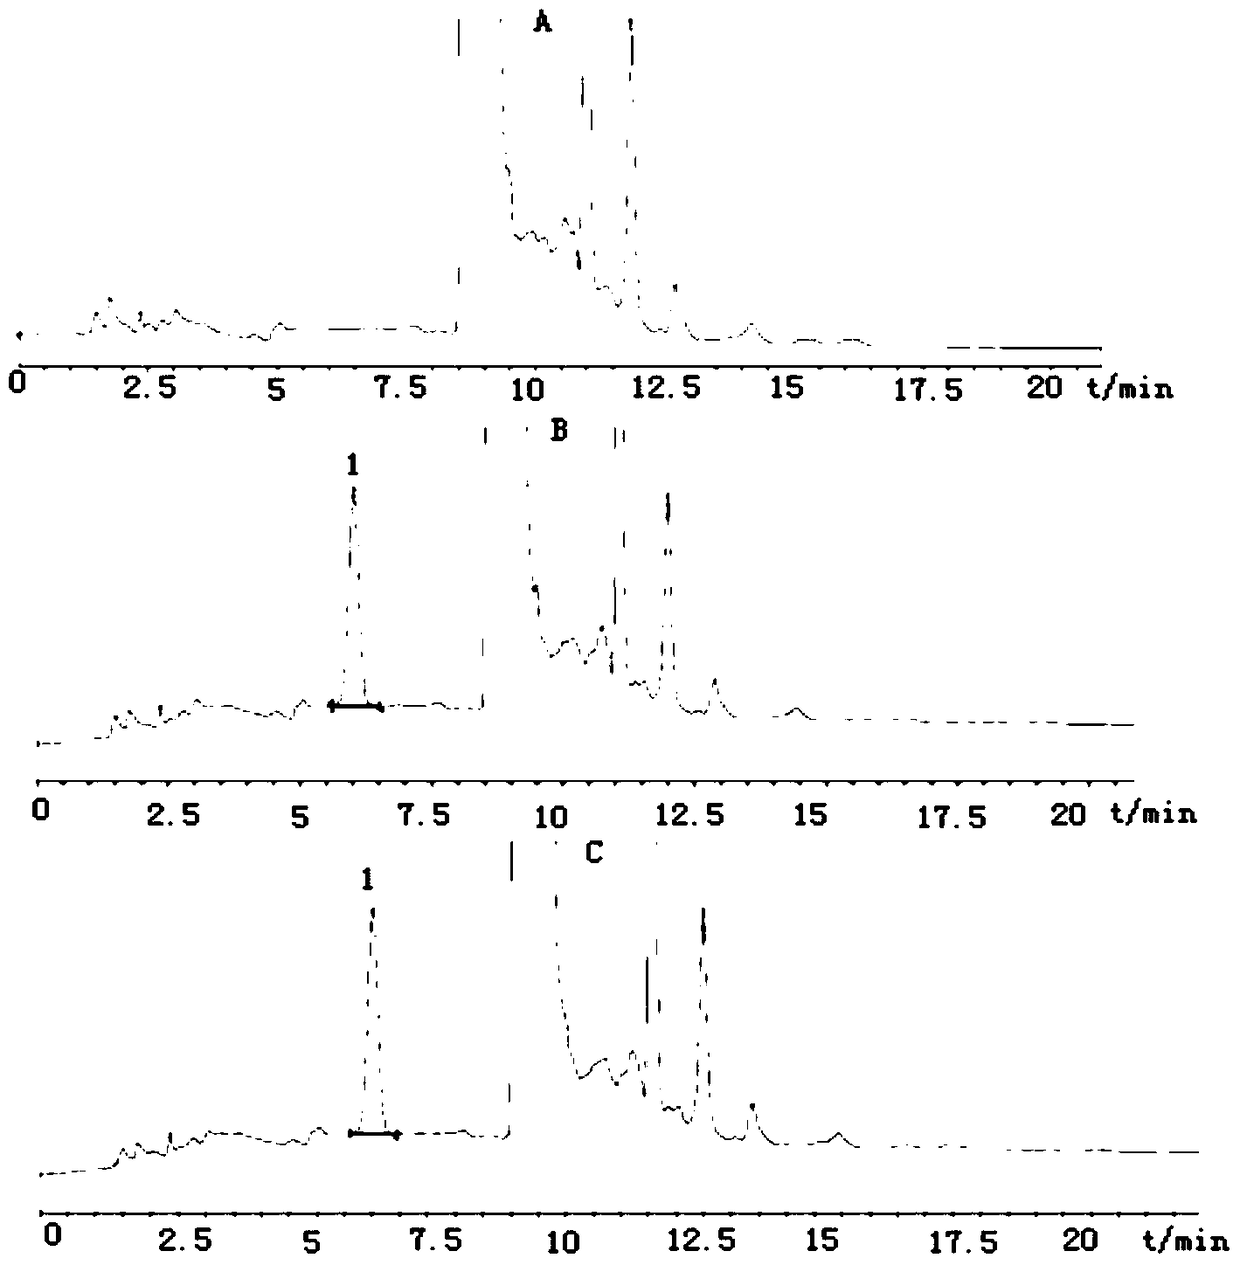 Determination method of edetate disodium in clevidipine butyrate injection emulsion